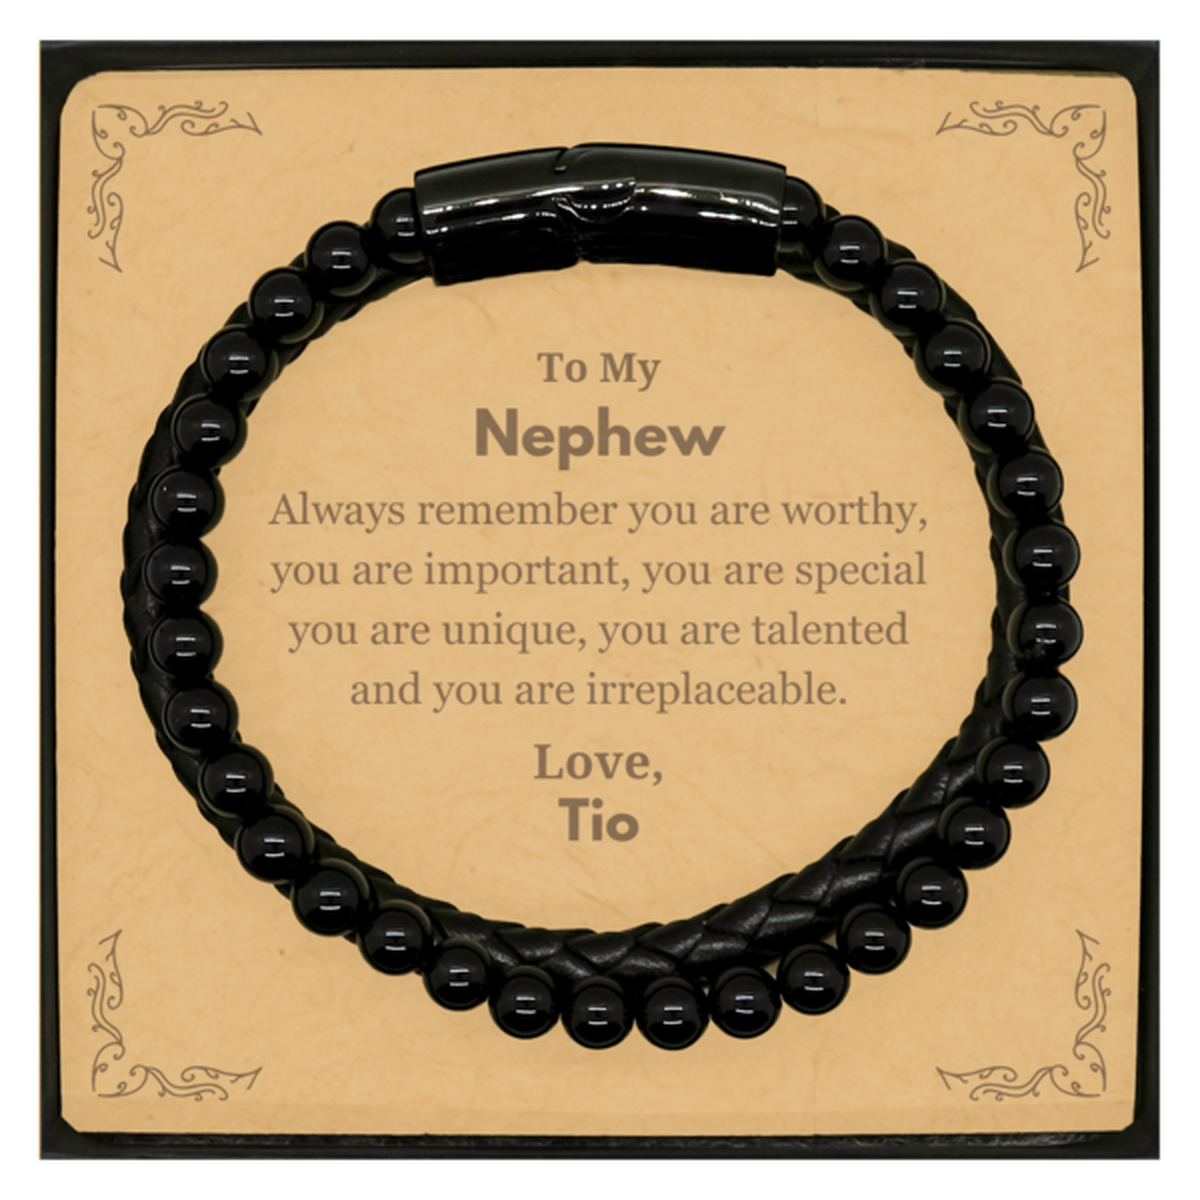 Nephew Birthday Gifts from Tio, Inspirational Stone Leather Bracelets for Nephew Christmas Graduation Gifts for Nephew Always remember you are worthy, you are important. Love, Tio